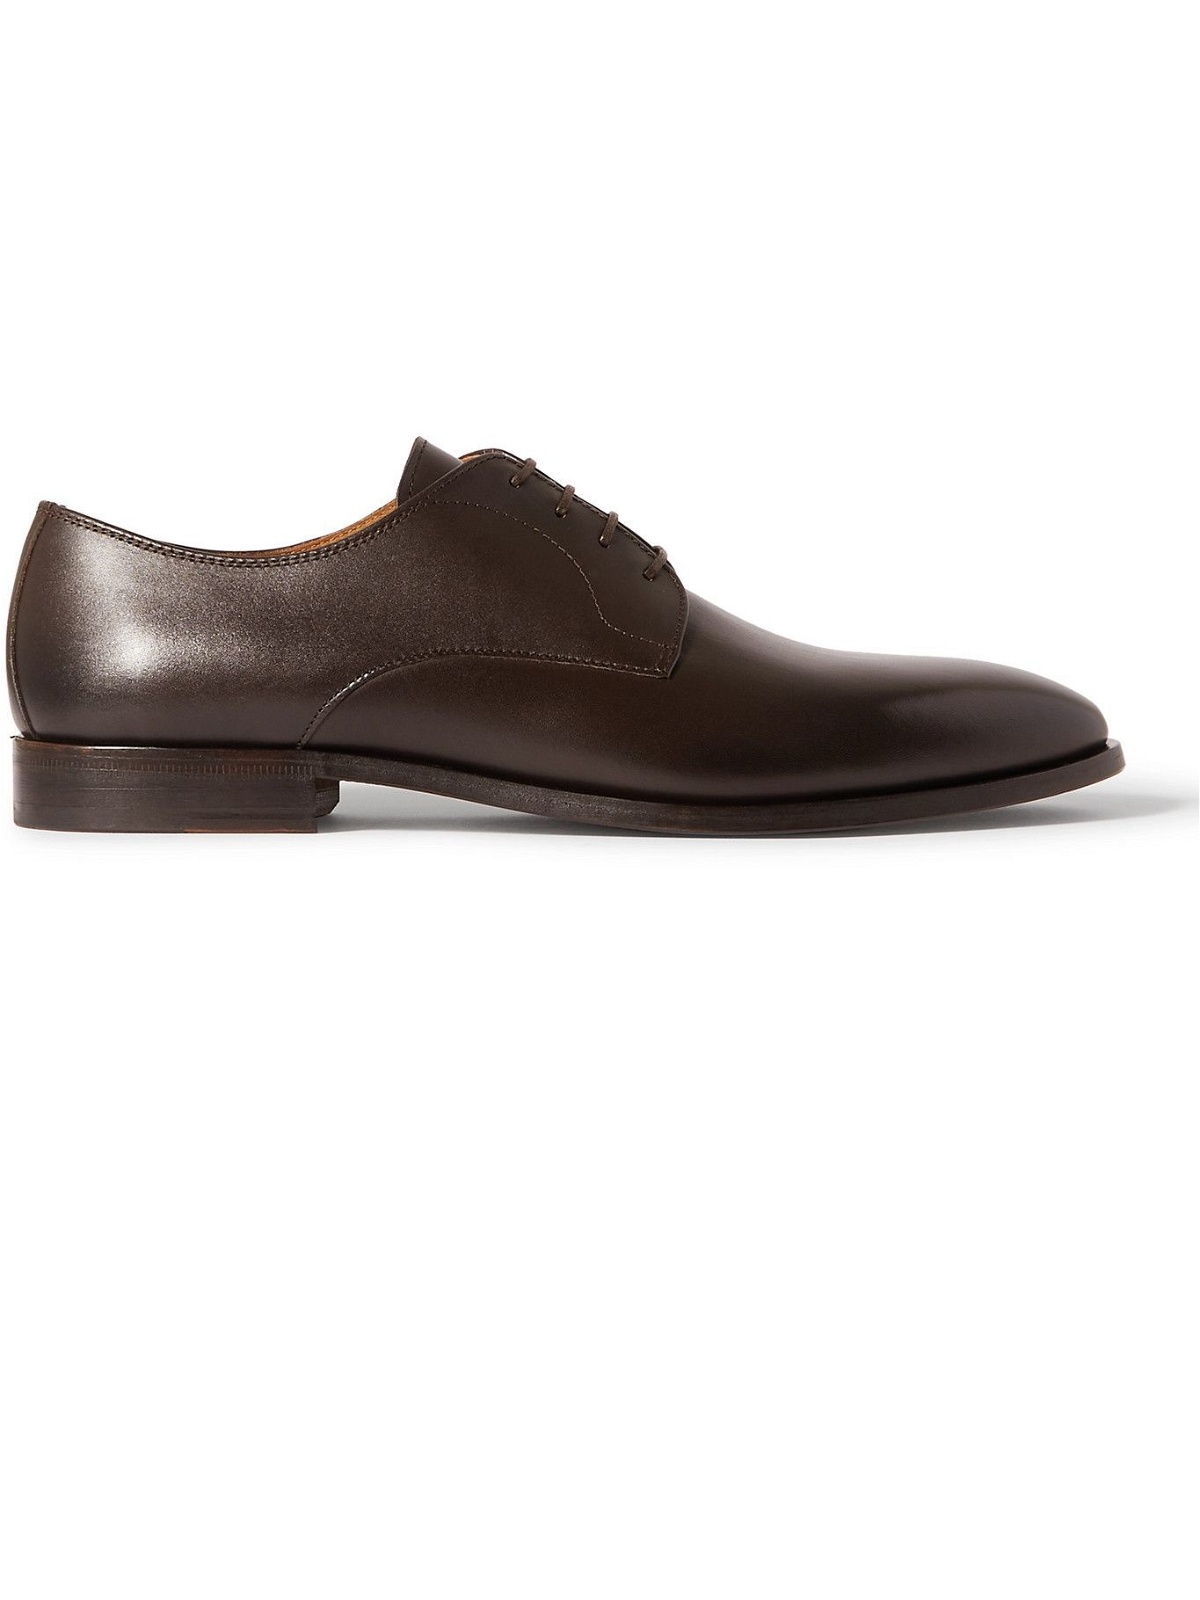 Photo: HUGO BOSS - Lisbon Leather Derby Shoes - Brown